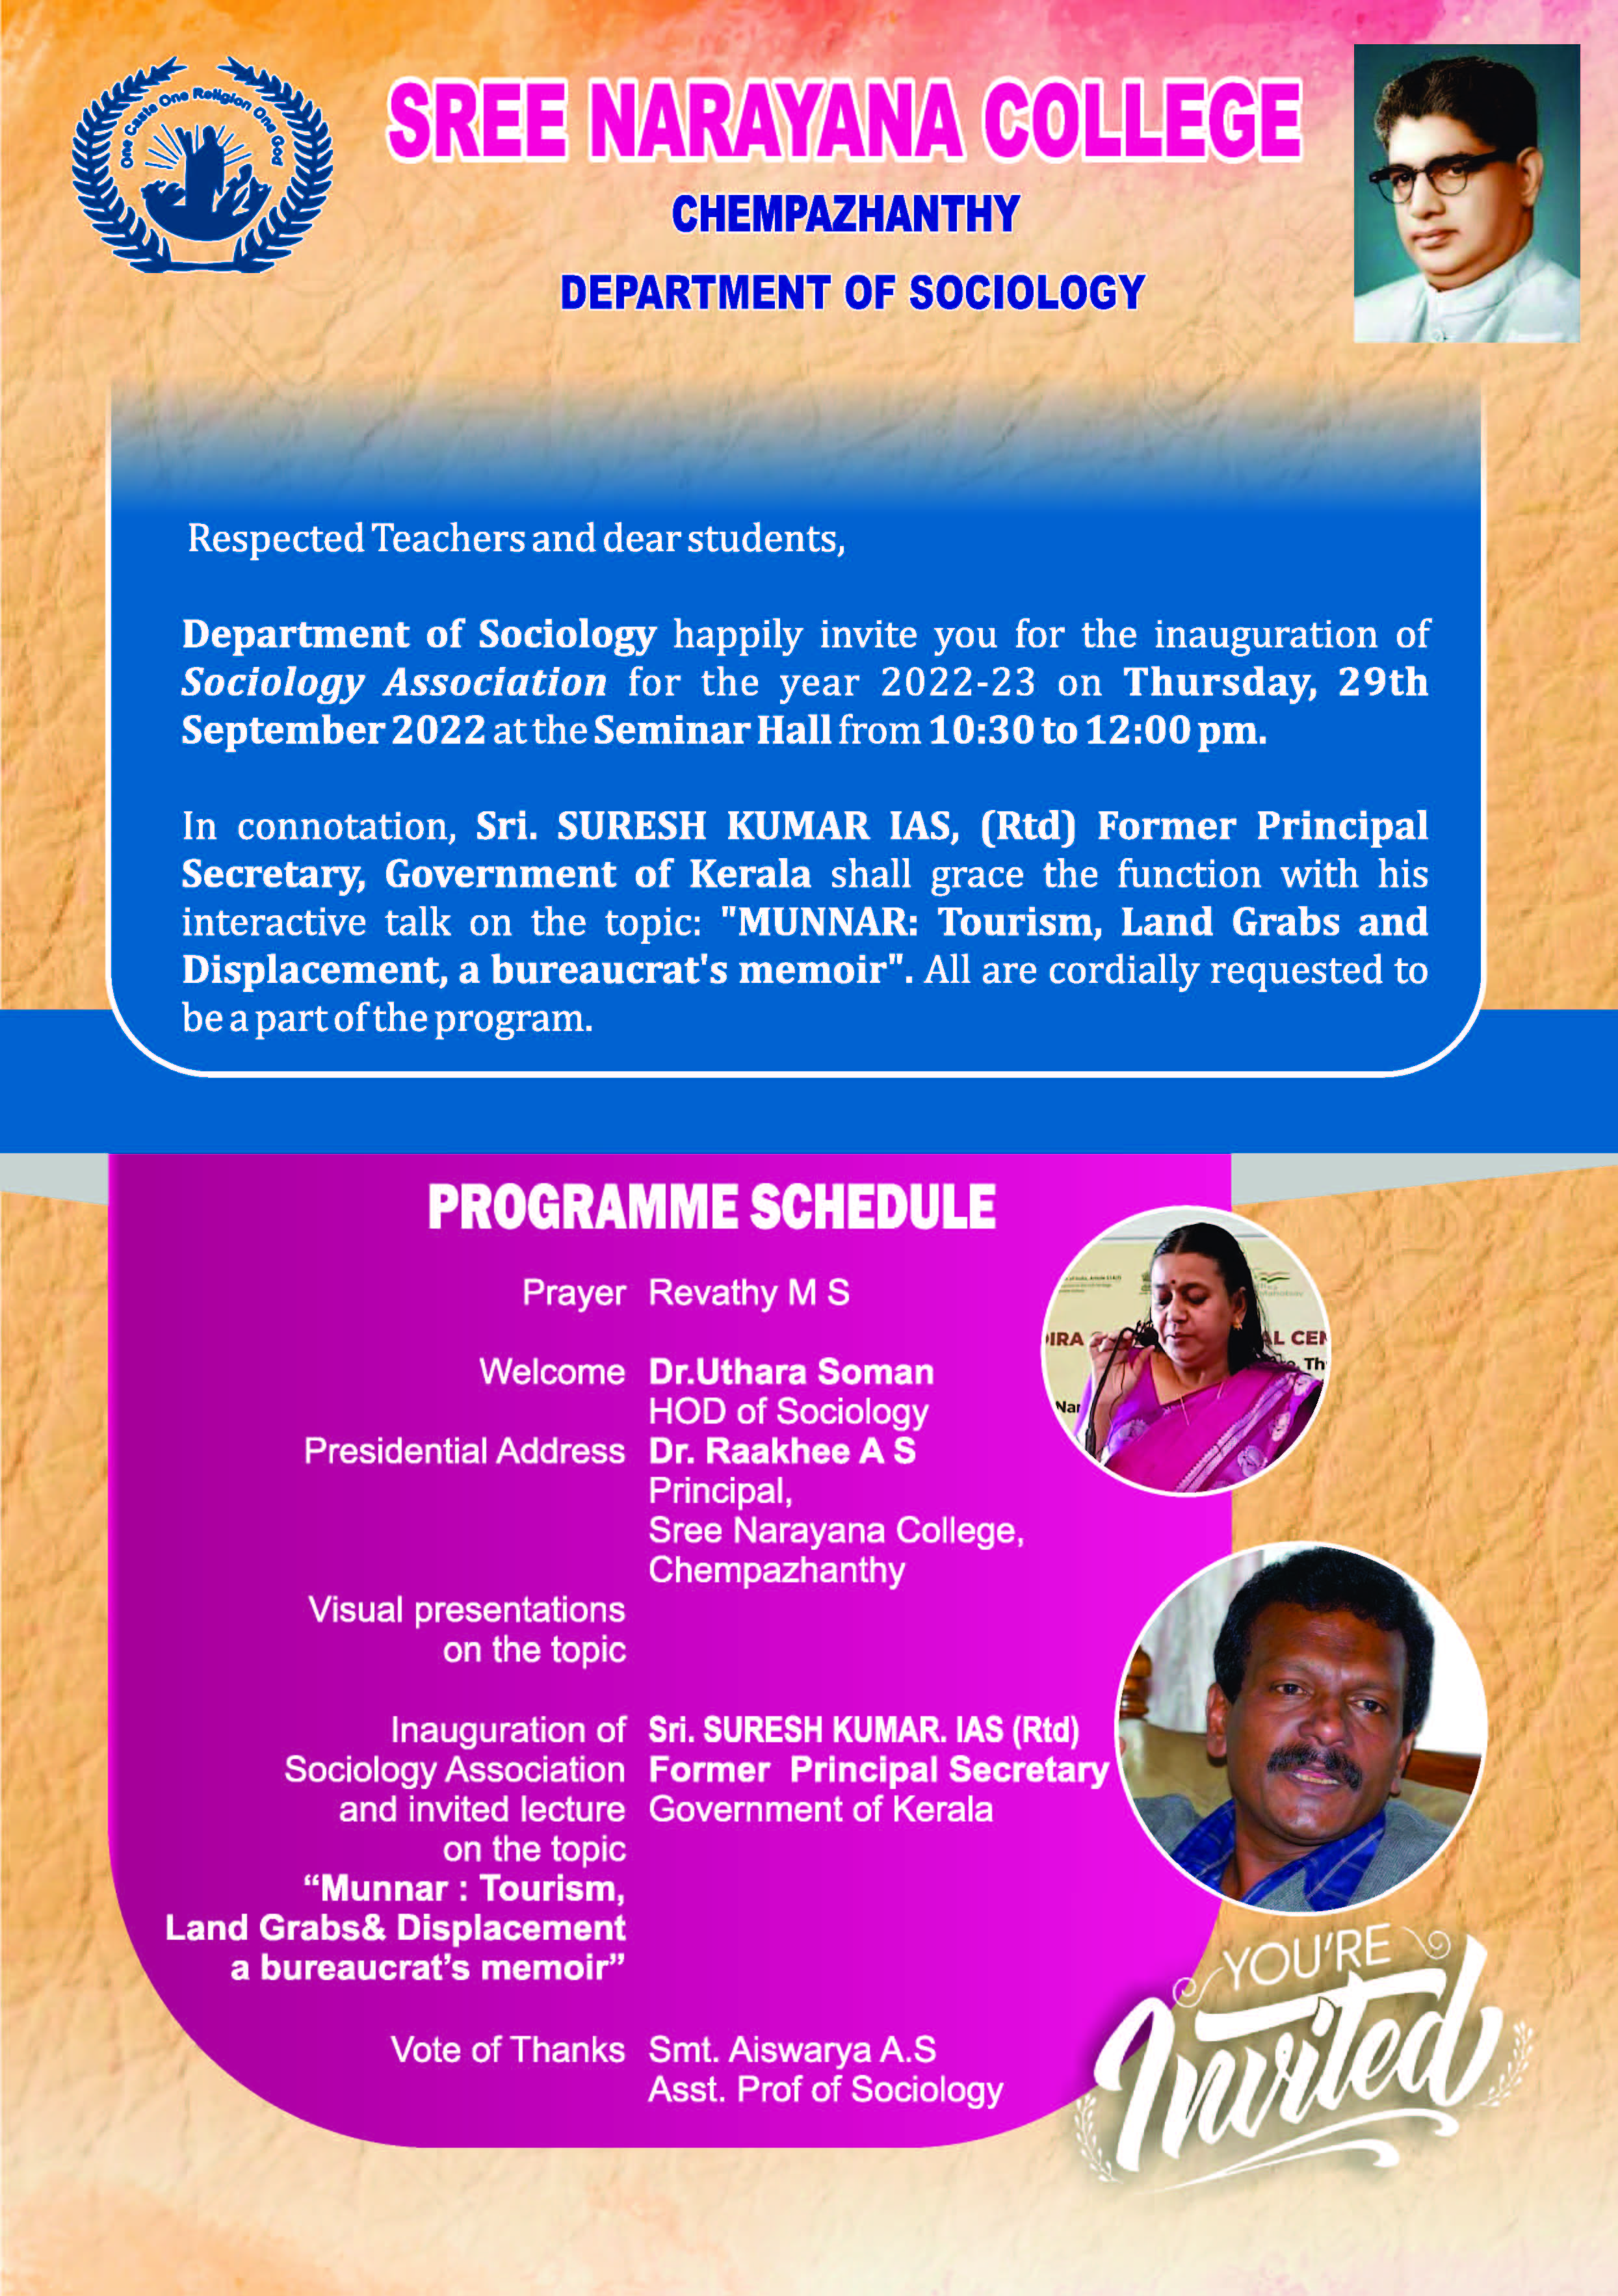 Sociology Association Inauguration and Invited lecture by Sri. SURESH KUMAR IAS